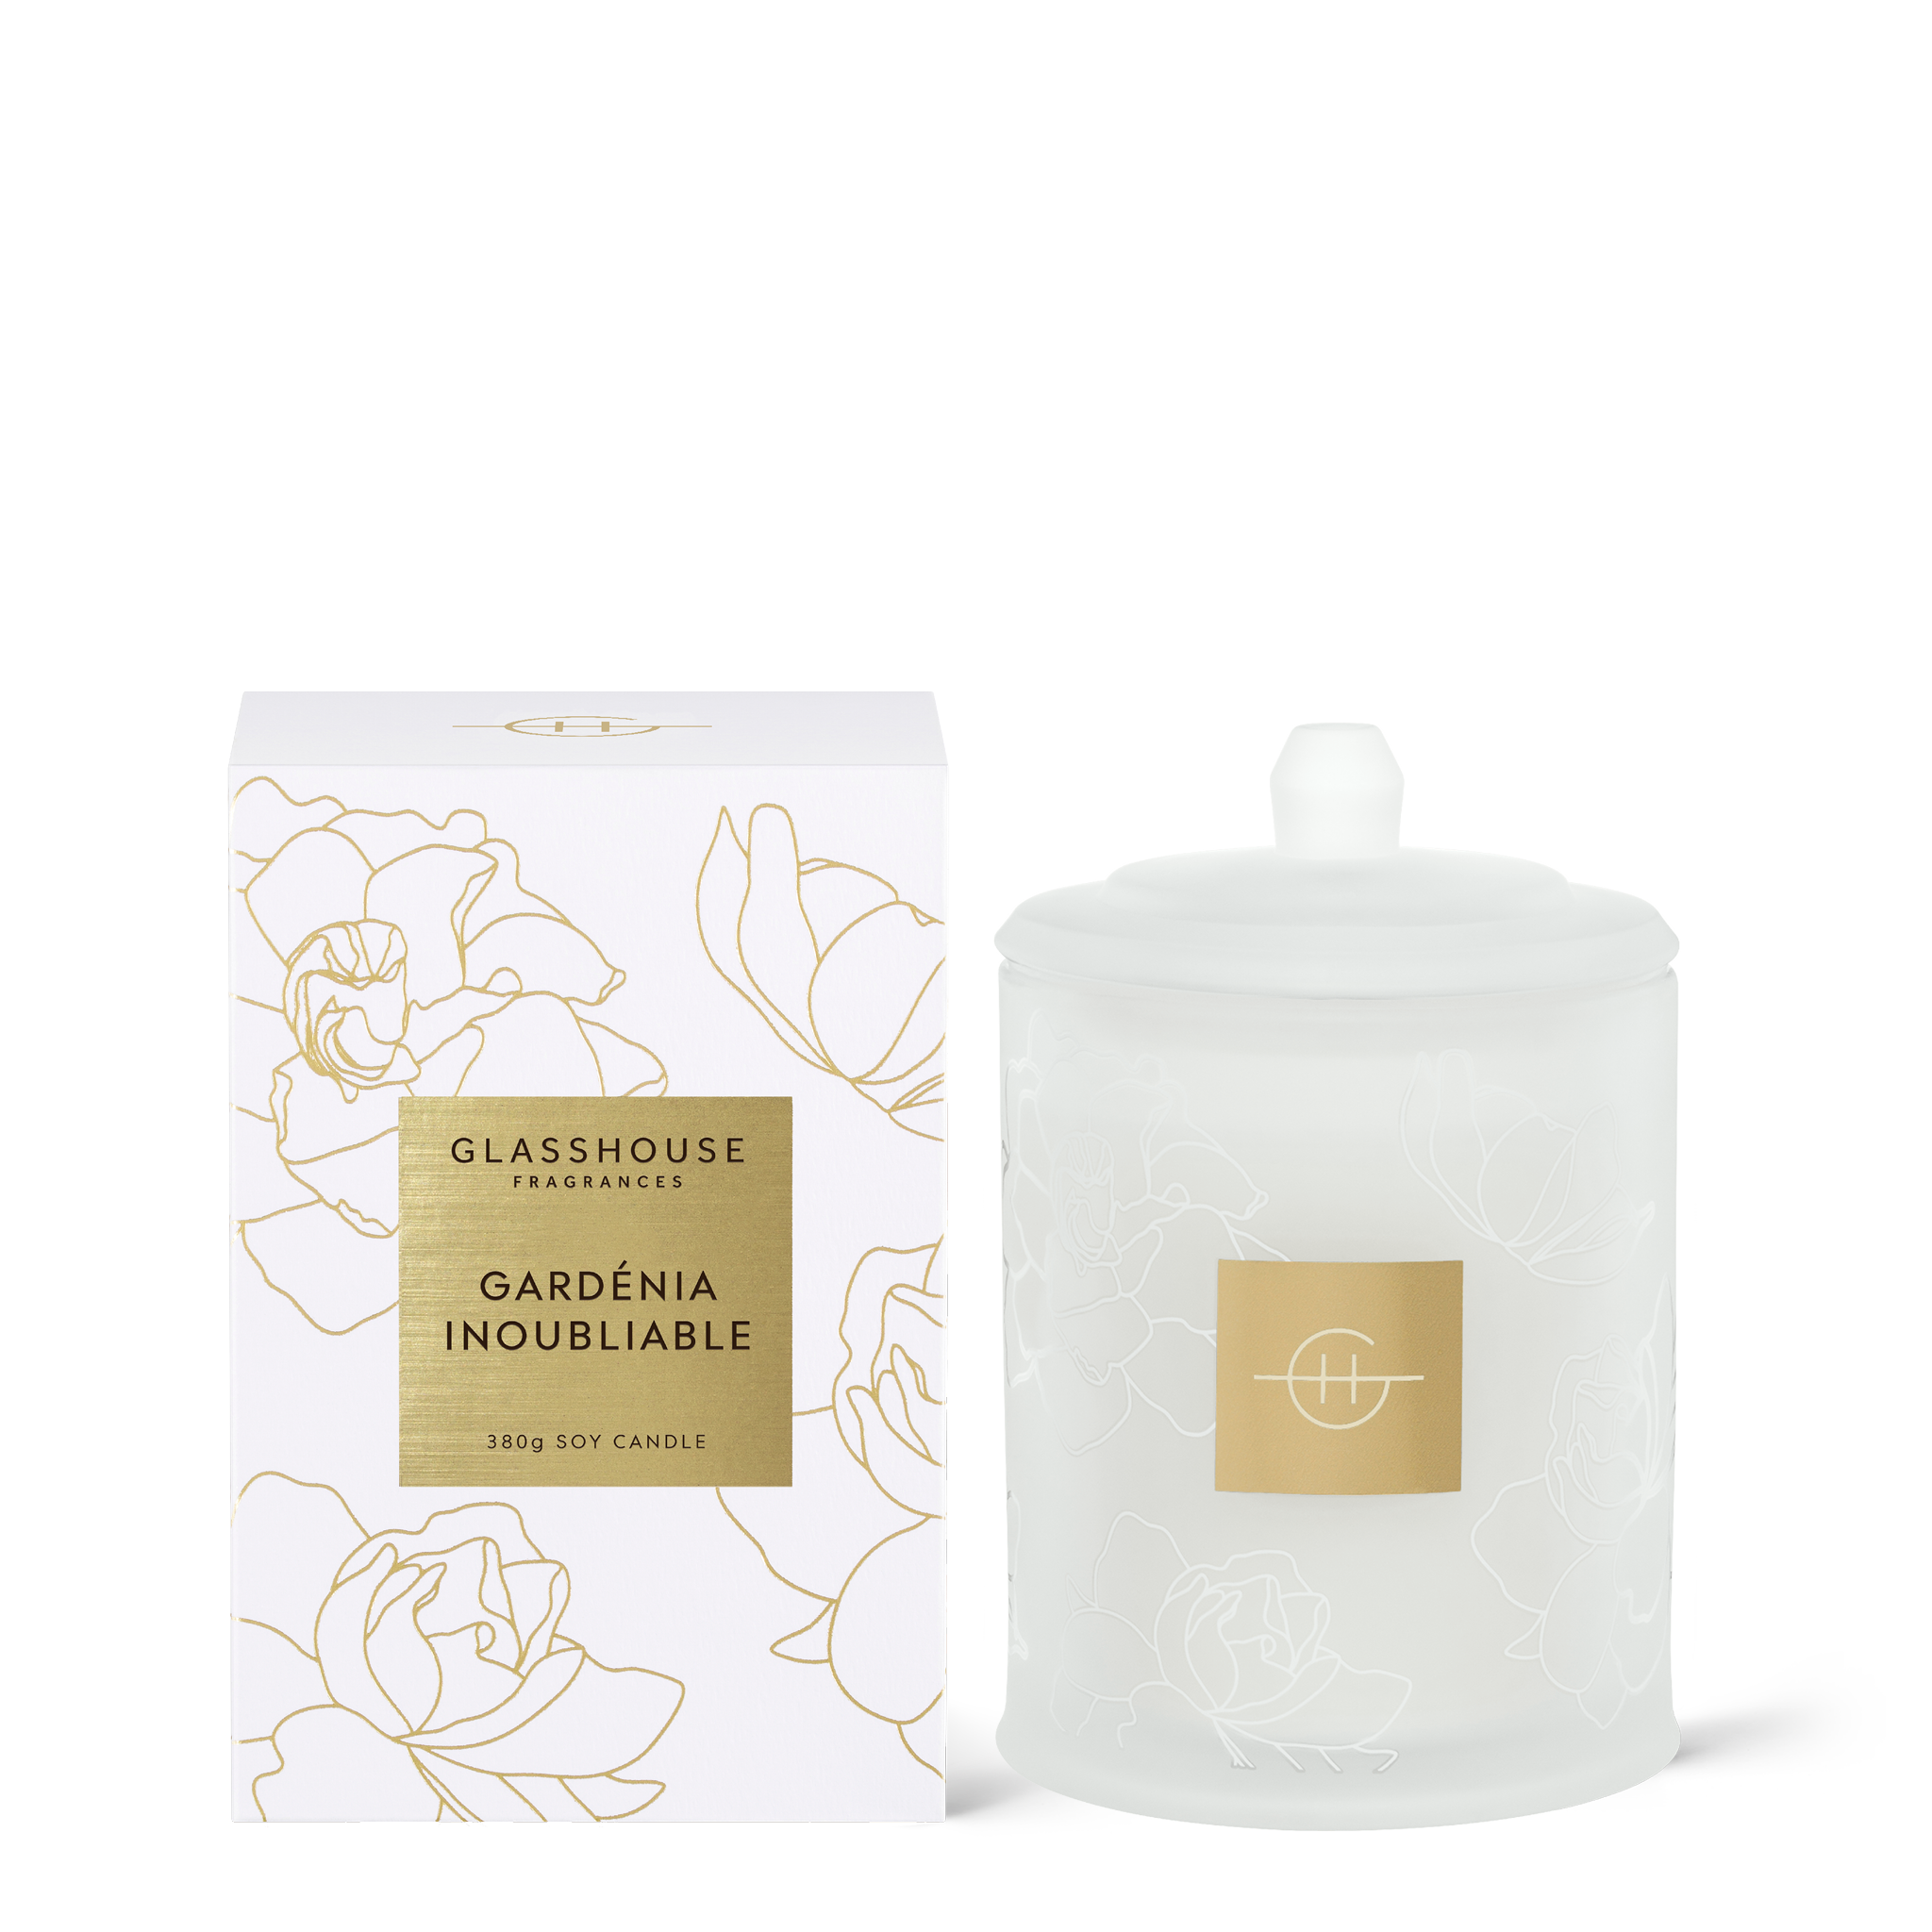 Gardenia Inoubliable 380g Triple Scented Soy Candle, box and vessel, by Glasshouse Fragrances